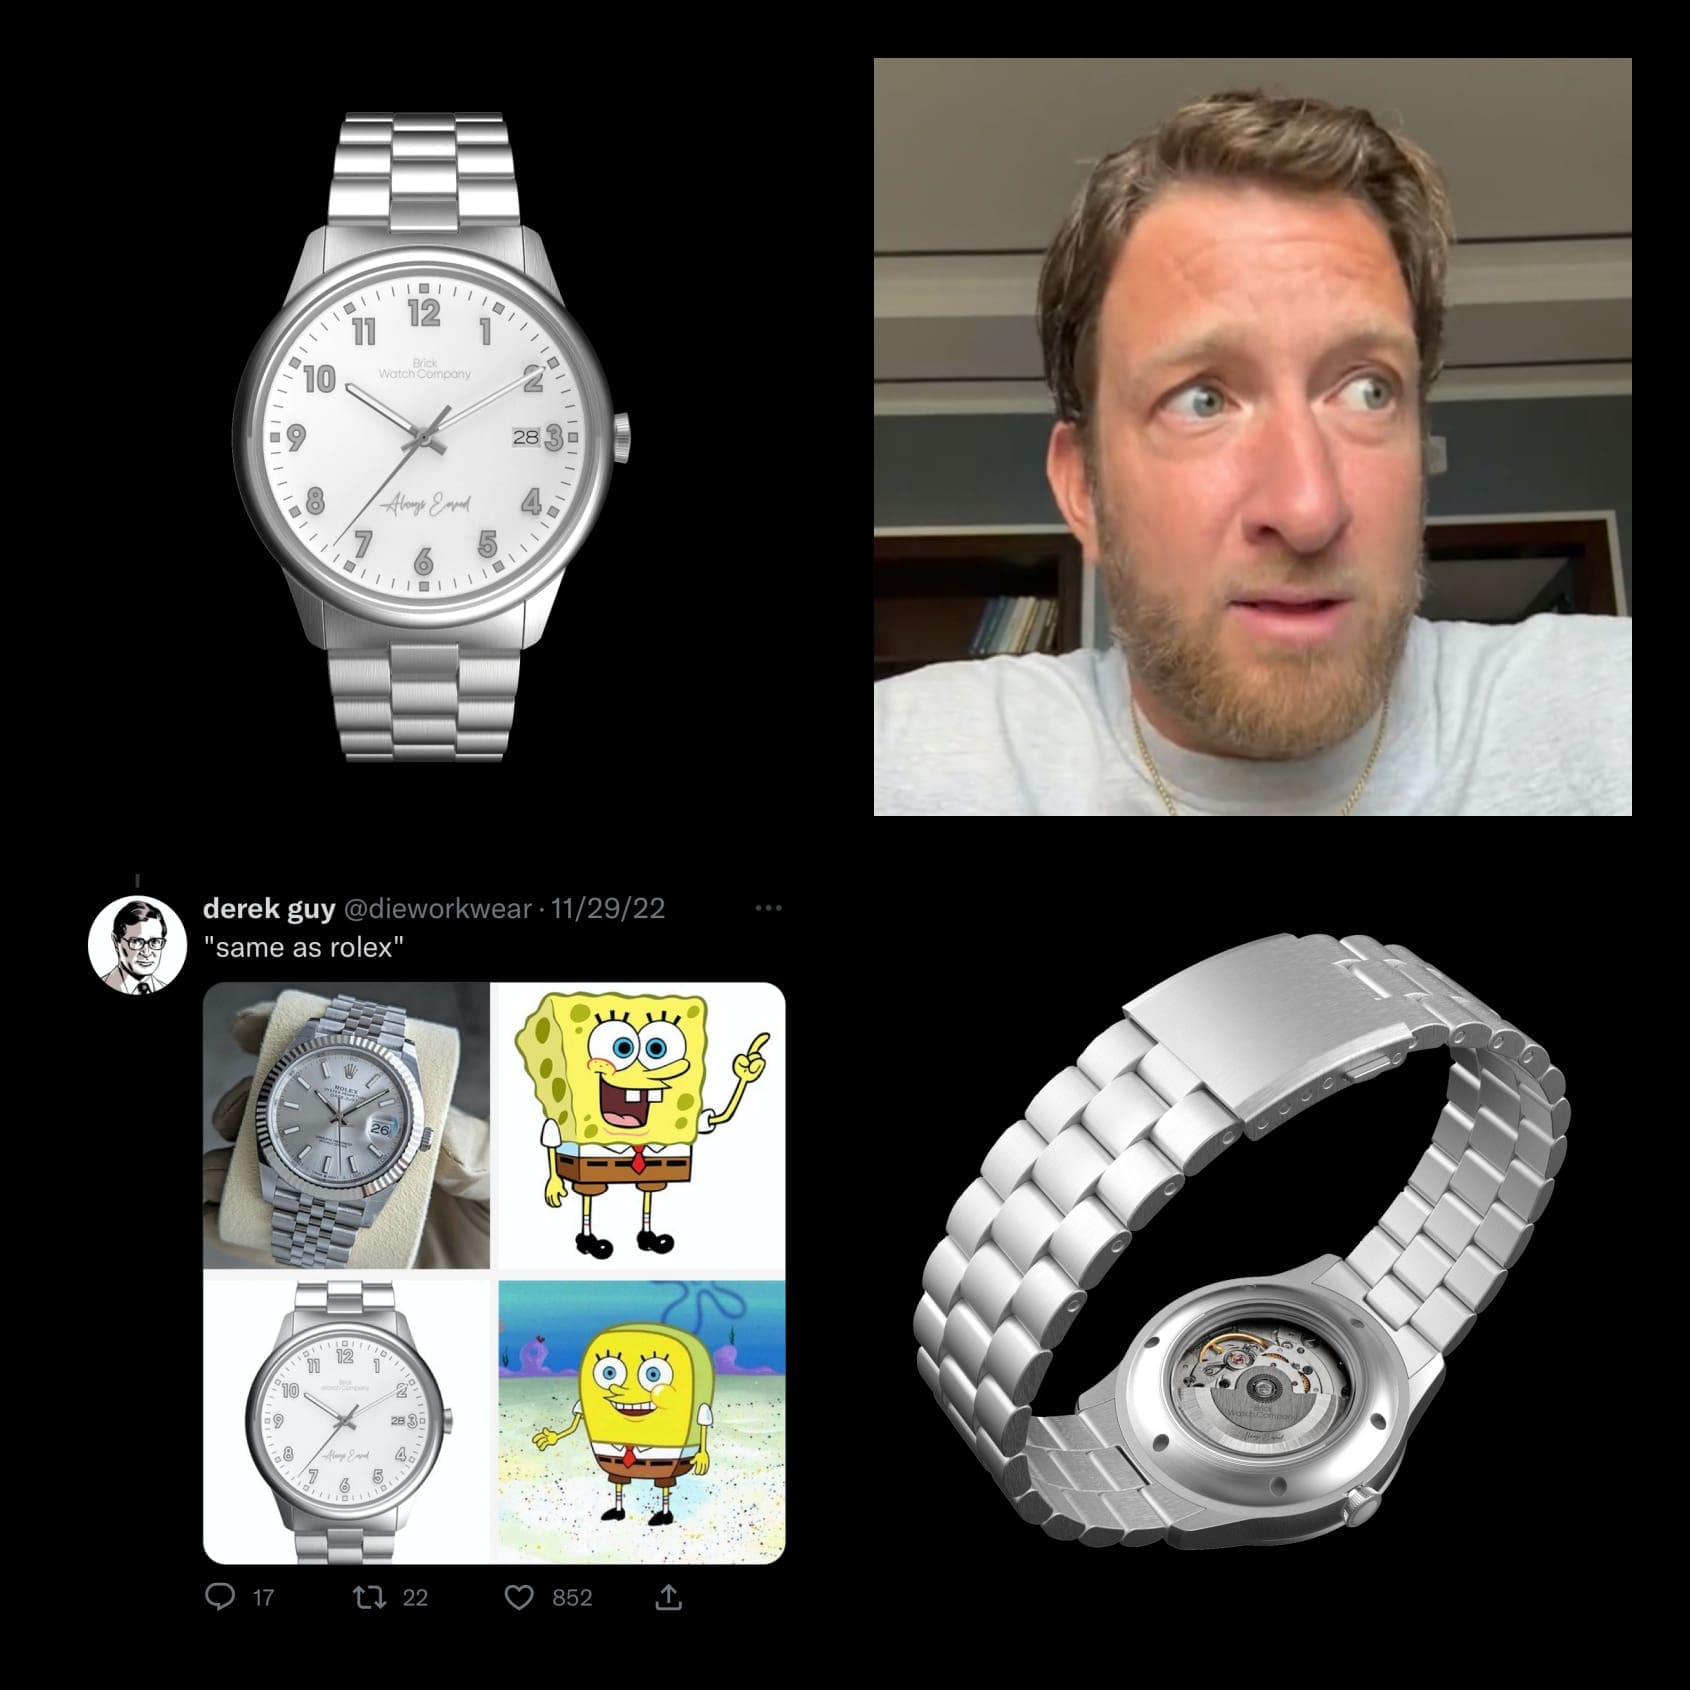 Barstool Sports “presidente” Dave Portnoy offends watch lovers with his new watch brand – then doubles down